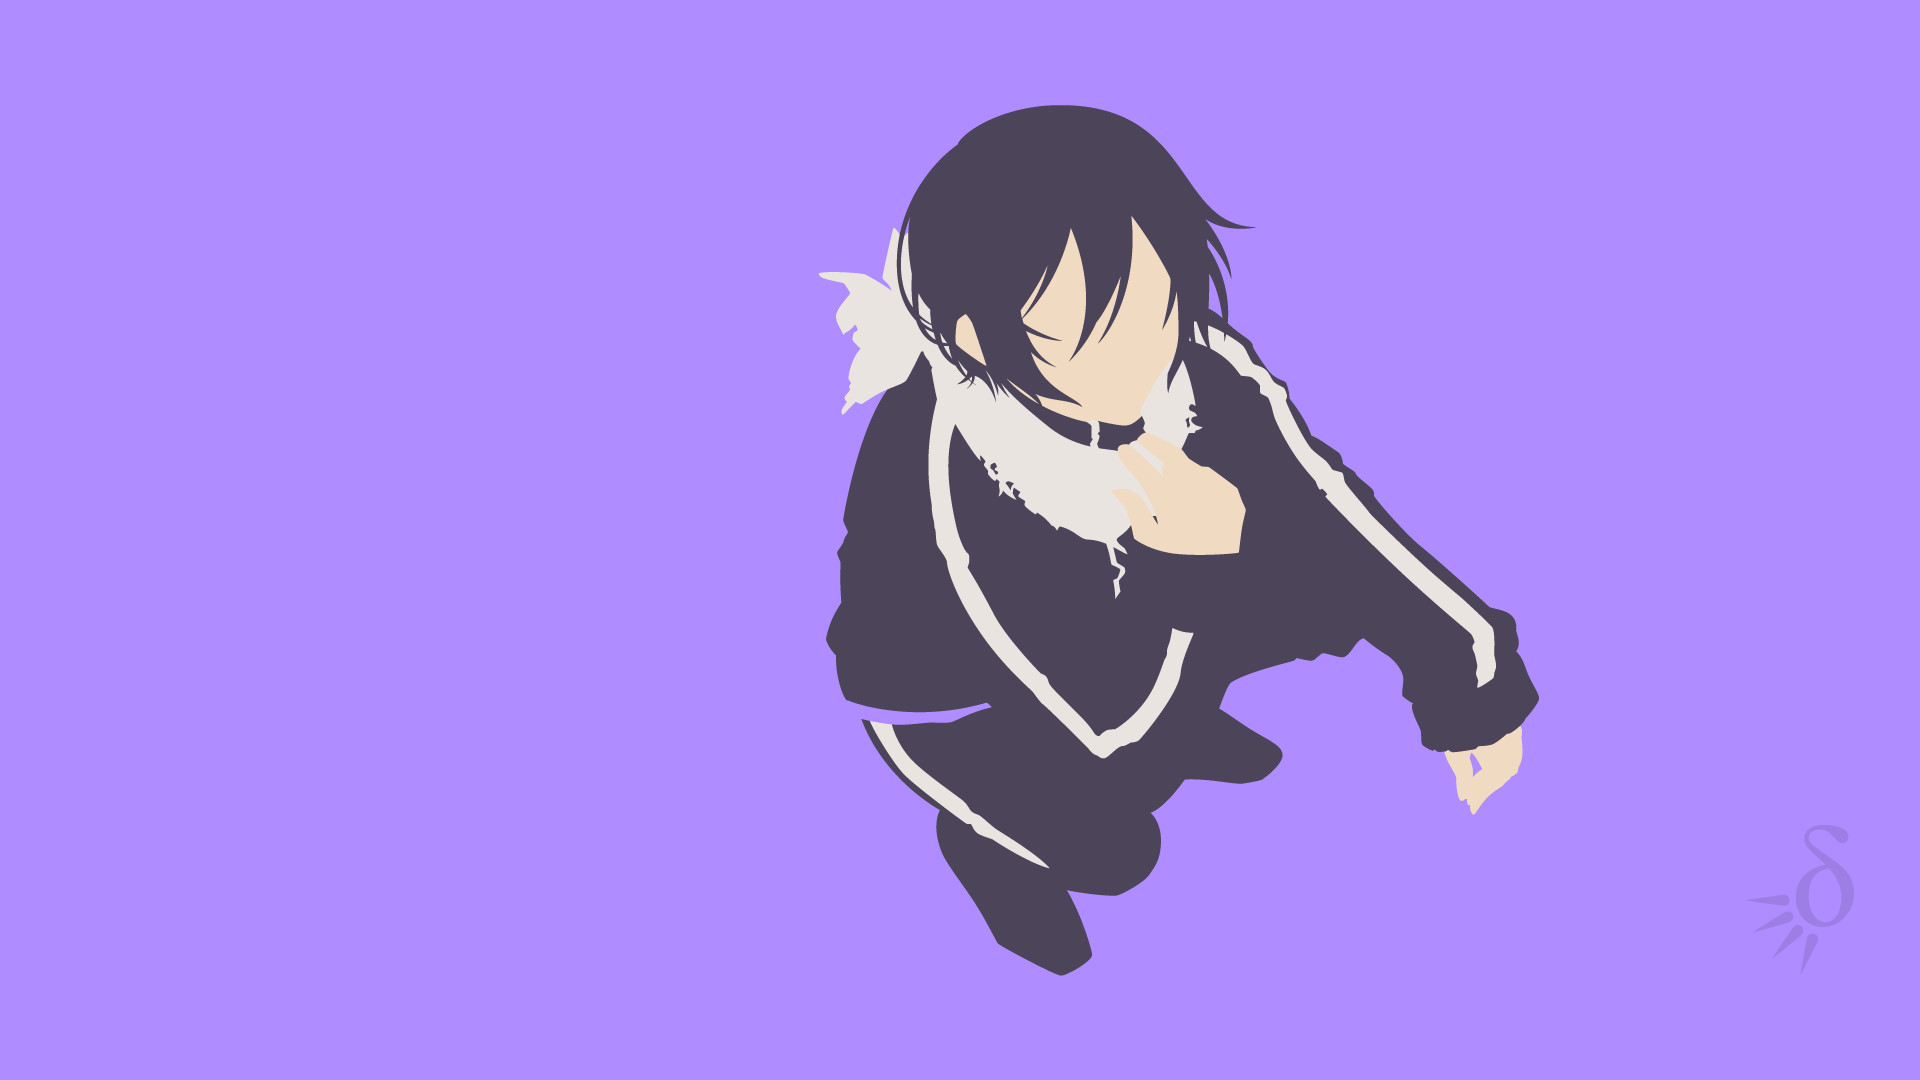 1920x1080 noragami yato by krukmeister fan art wallpaper movies tv add a comment .